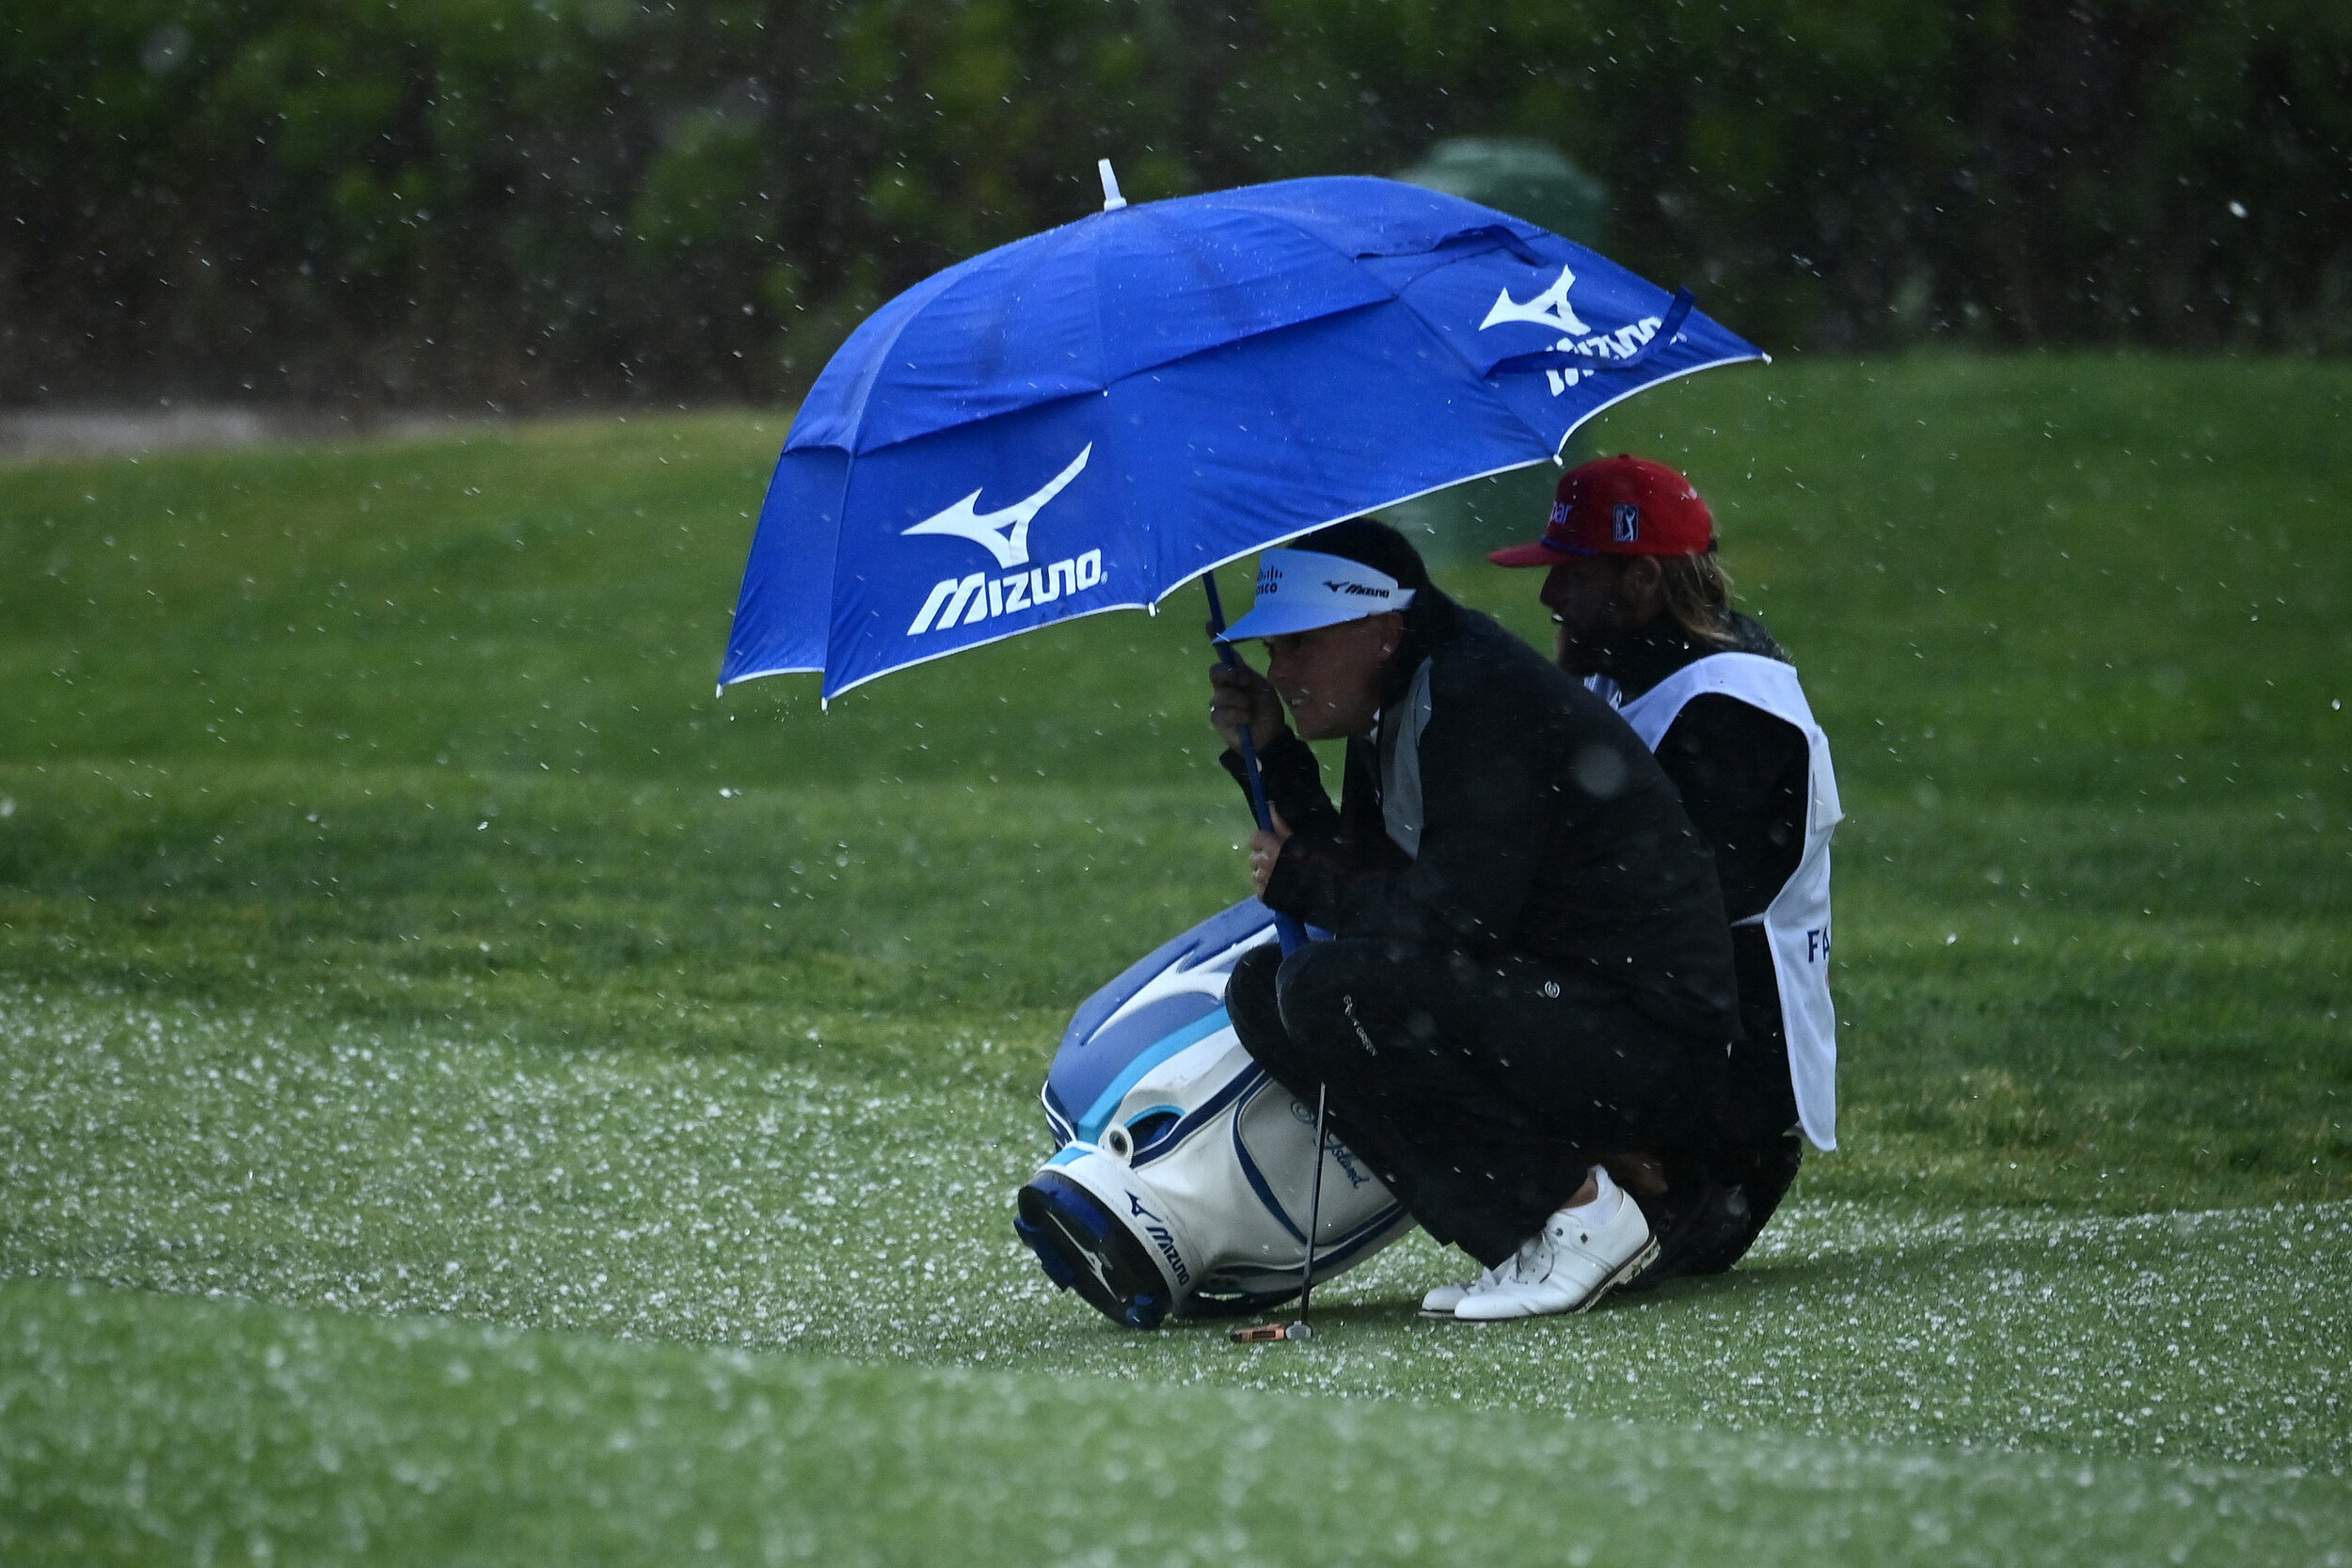  SAN DIEGO, CALIFORNIA - JANUARY 29: Keith Mitchell huddles with his caddie as a hailstorm hits the course during round two of the Farmers Insurance Open at Torrey Pines on January 29, 2021 in San Diego, California. (Photo by Donald Miralle/Getty Ima